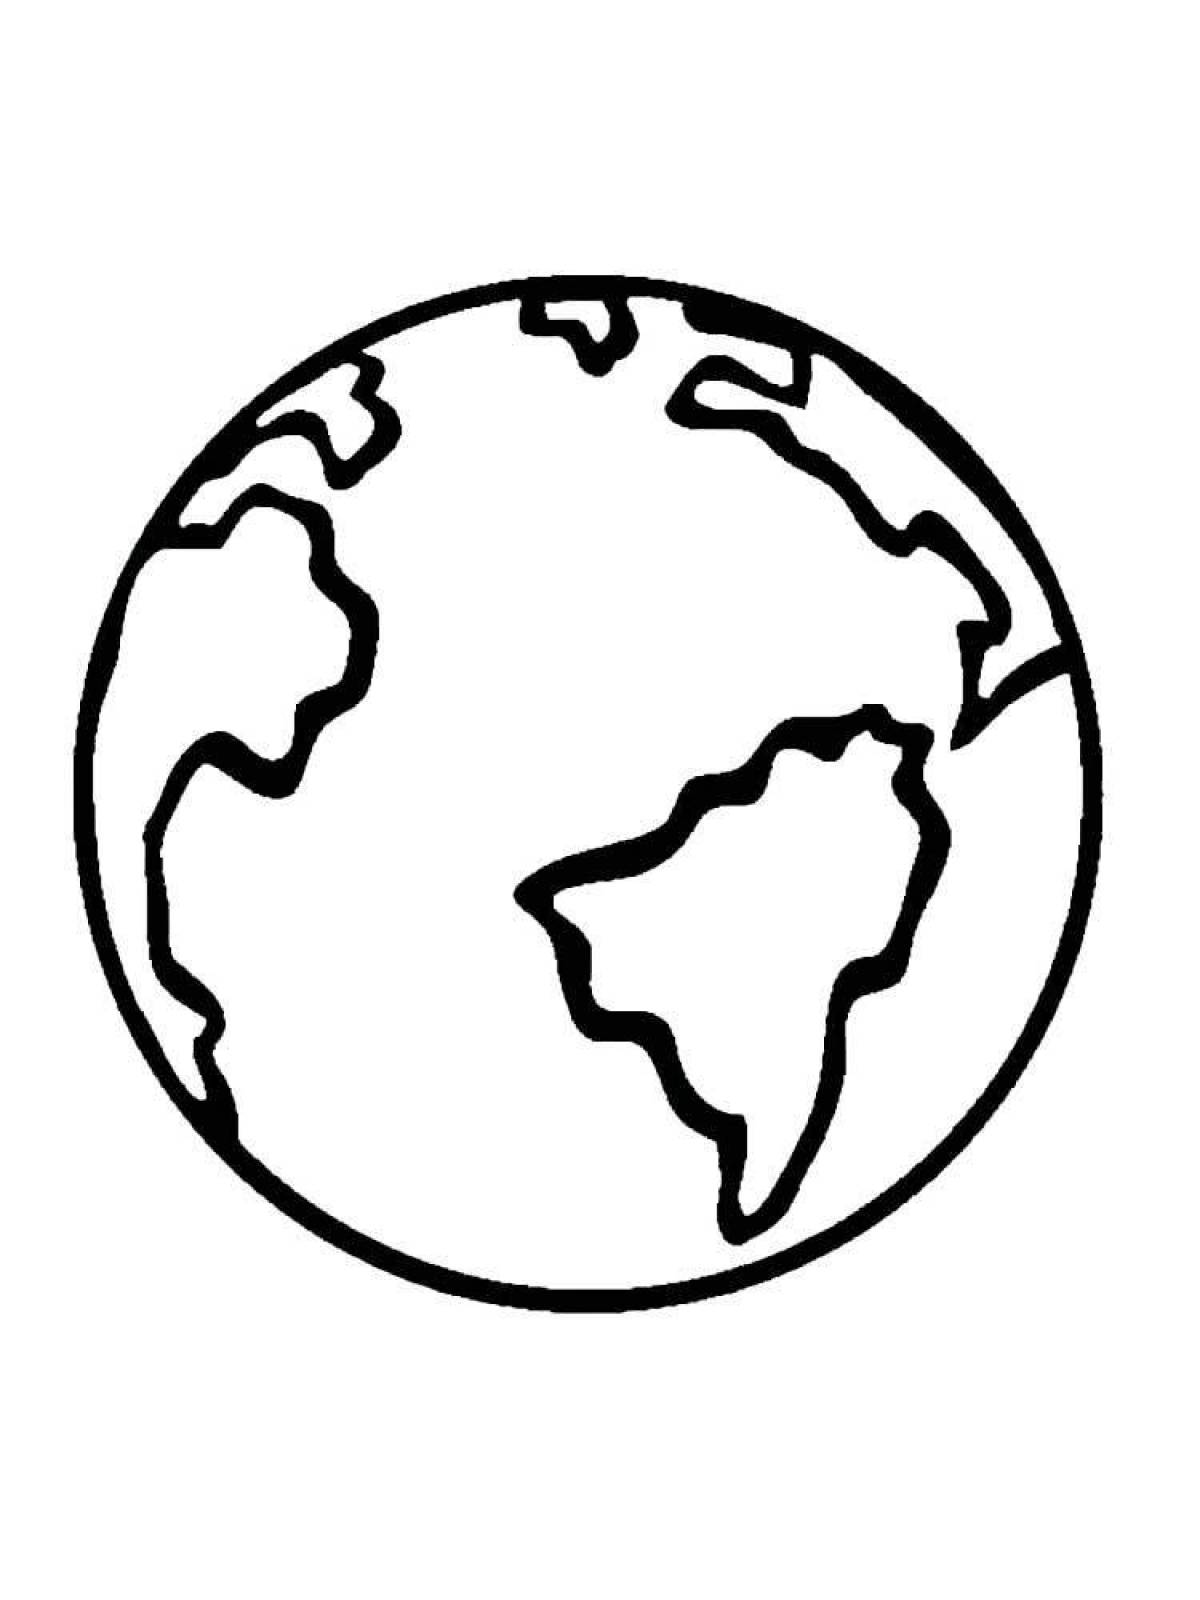 Coloring page adorable planet earth for kids